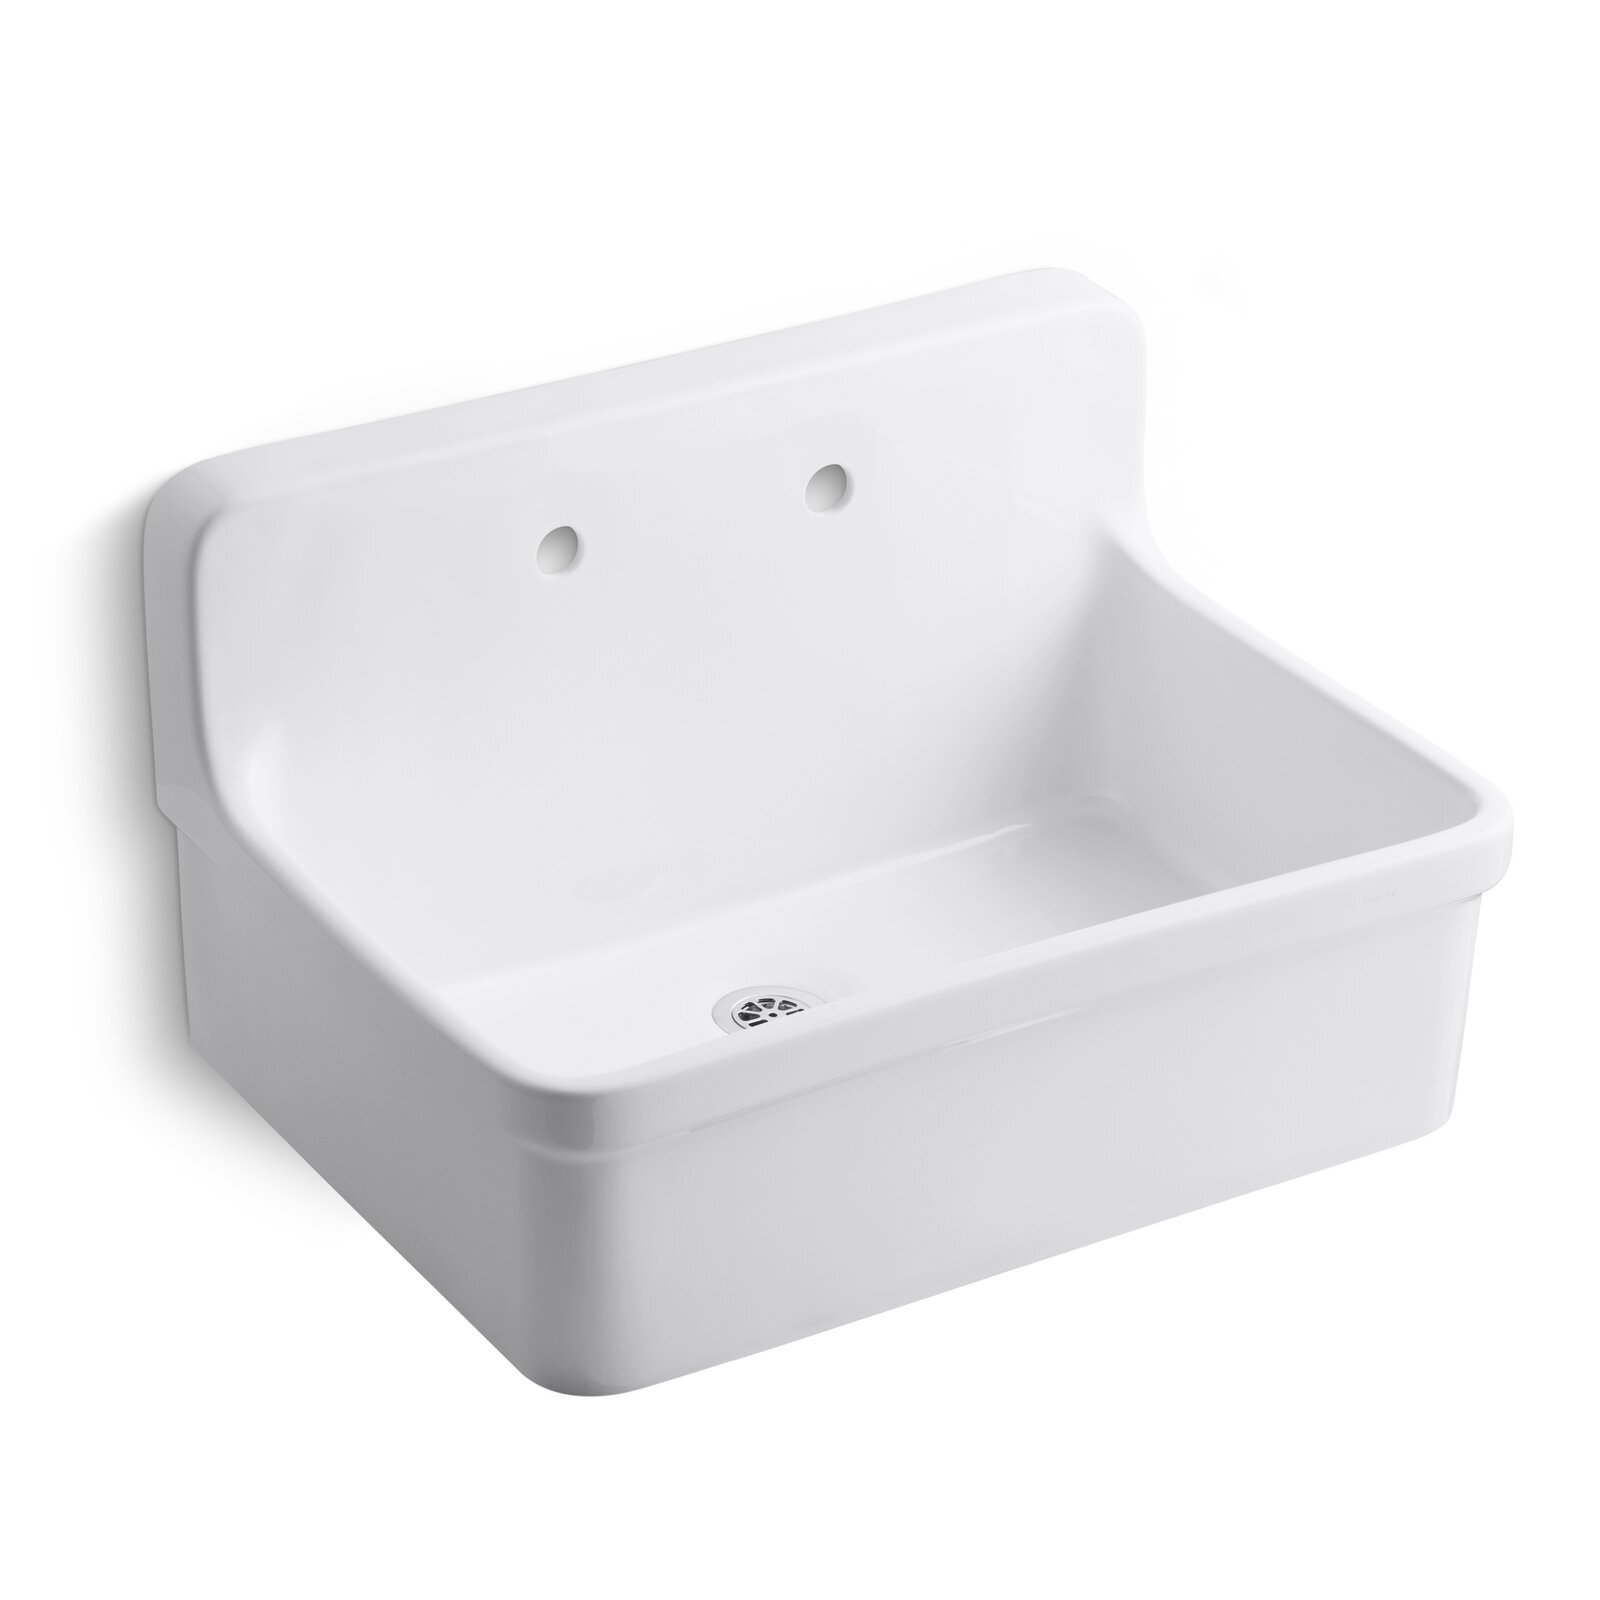 Wall mounted Porcelain Laundry Sink